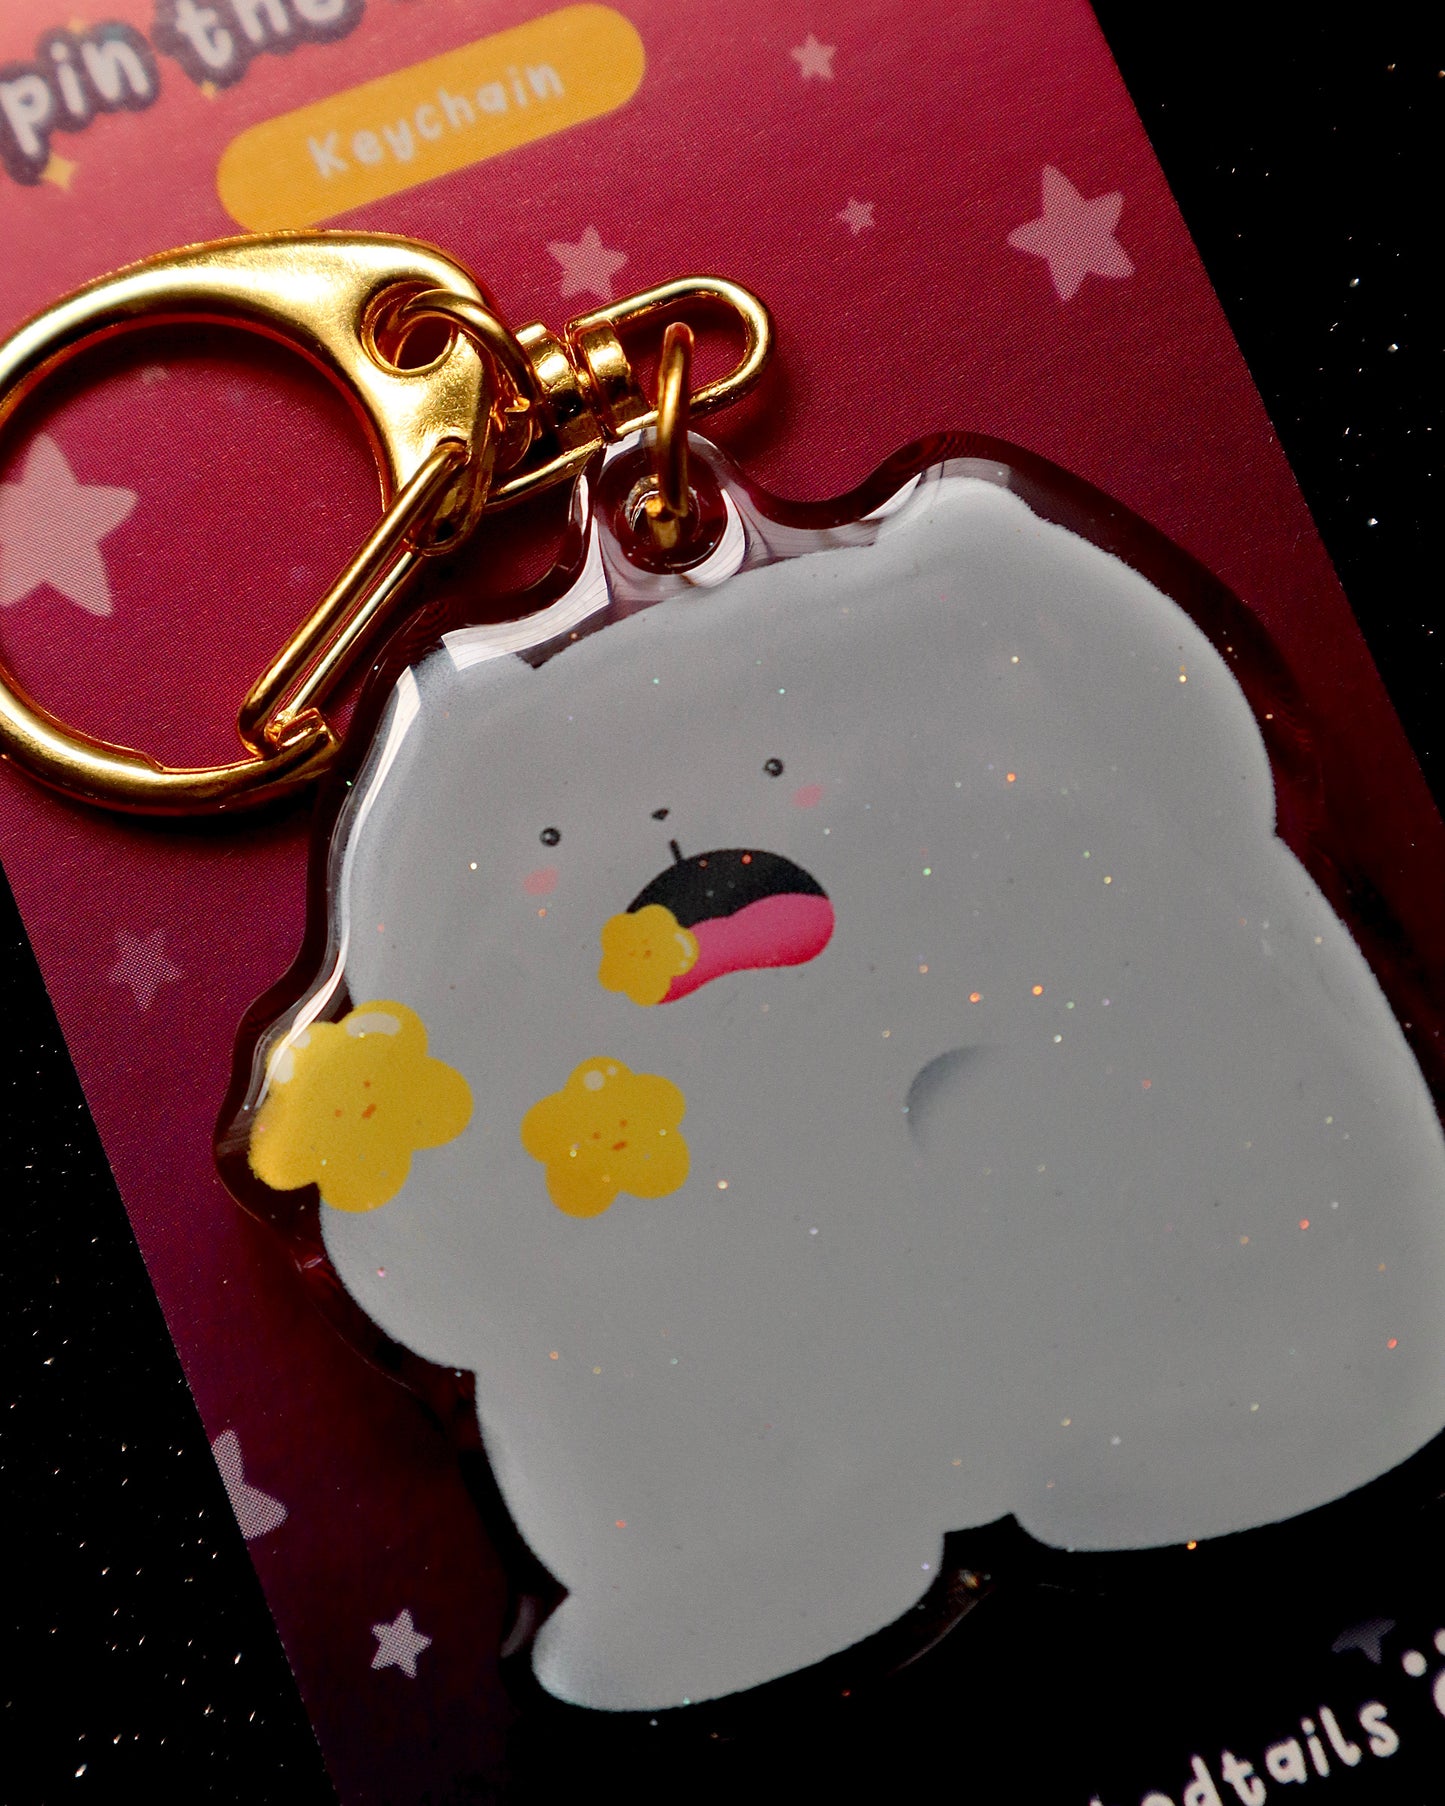 Pippin the Star Eater Glitter Keychain